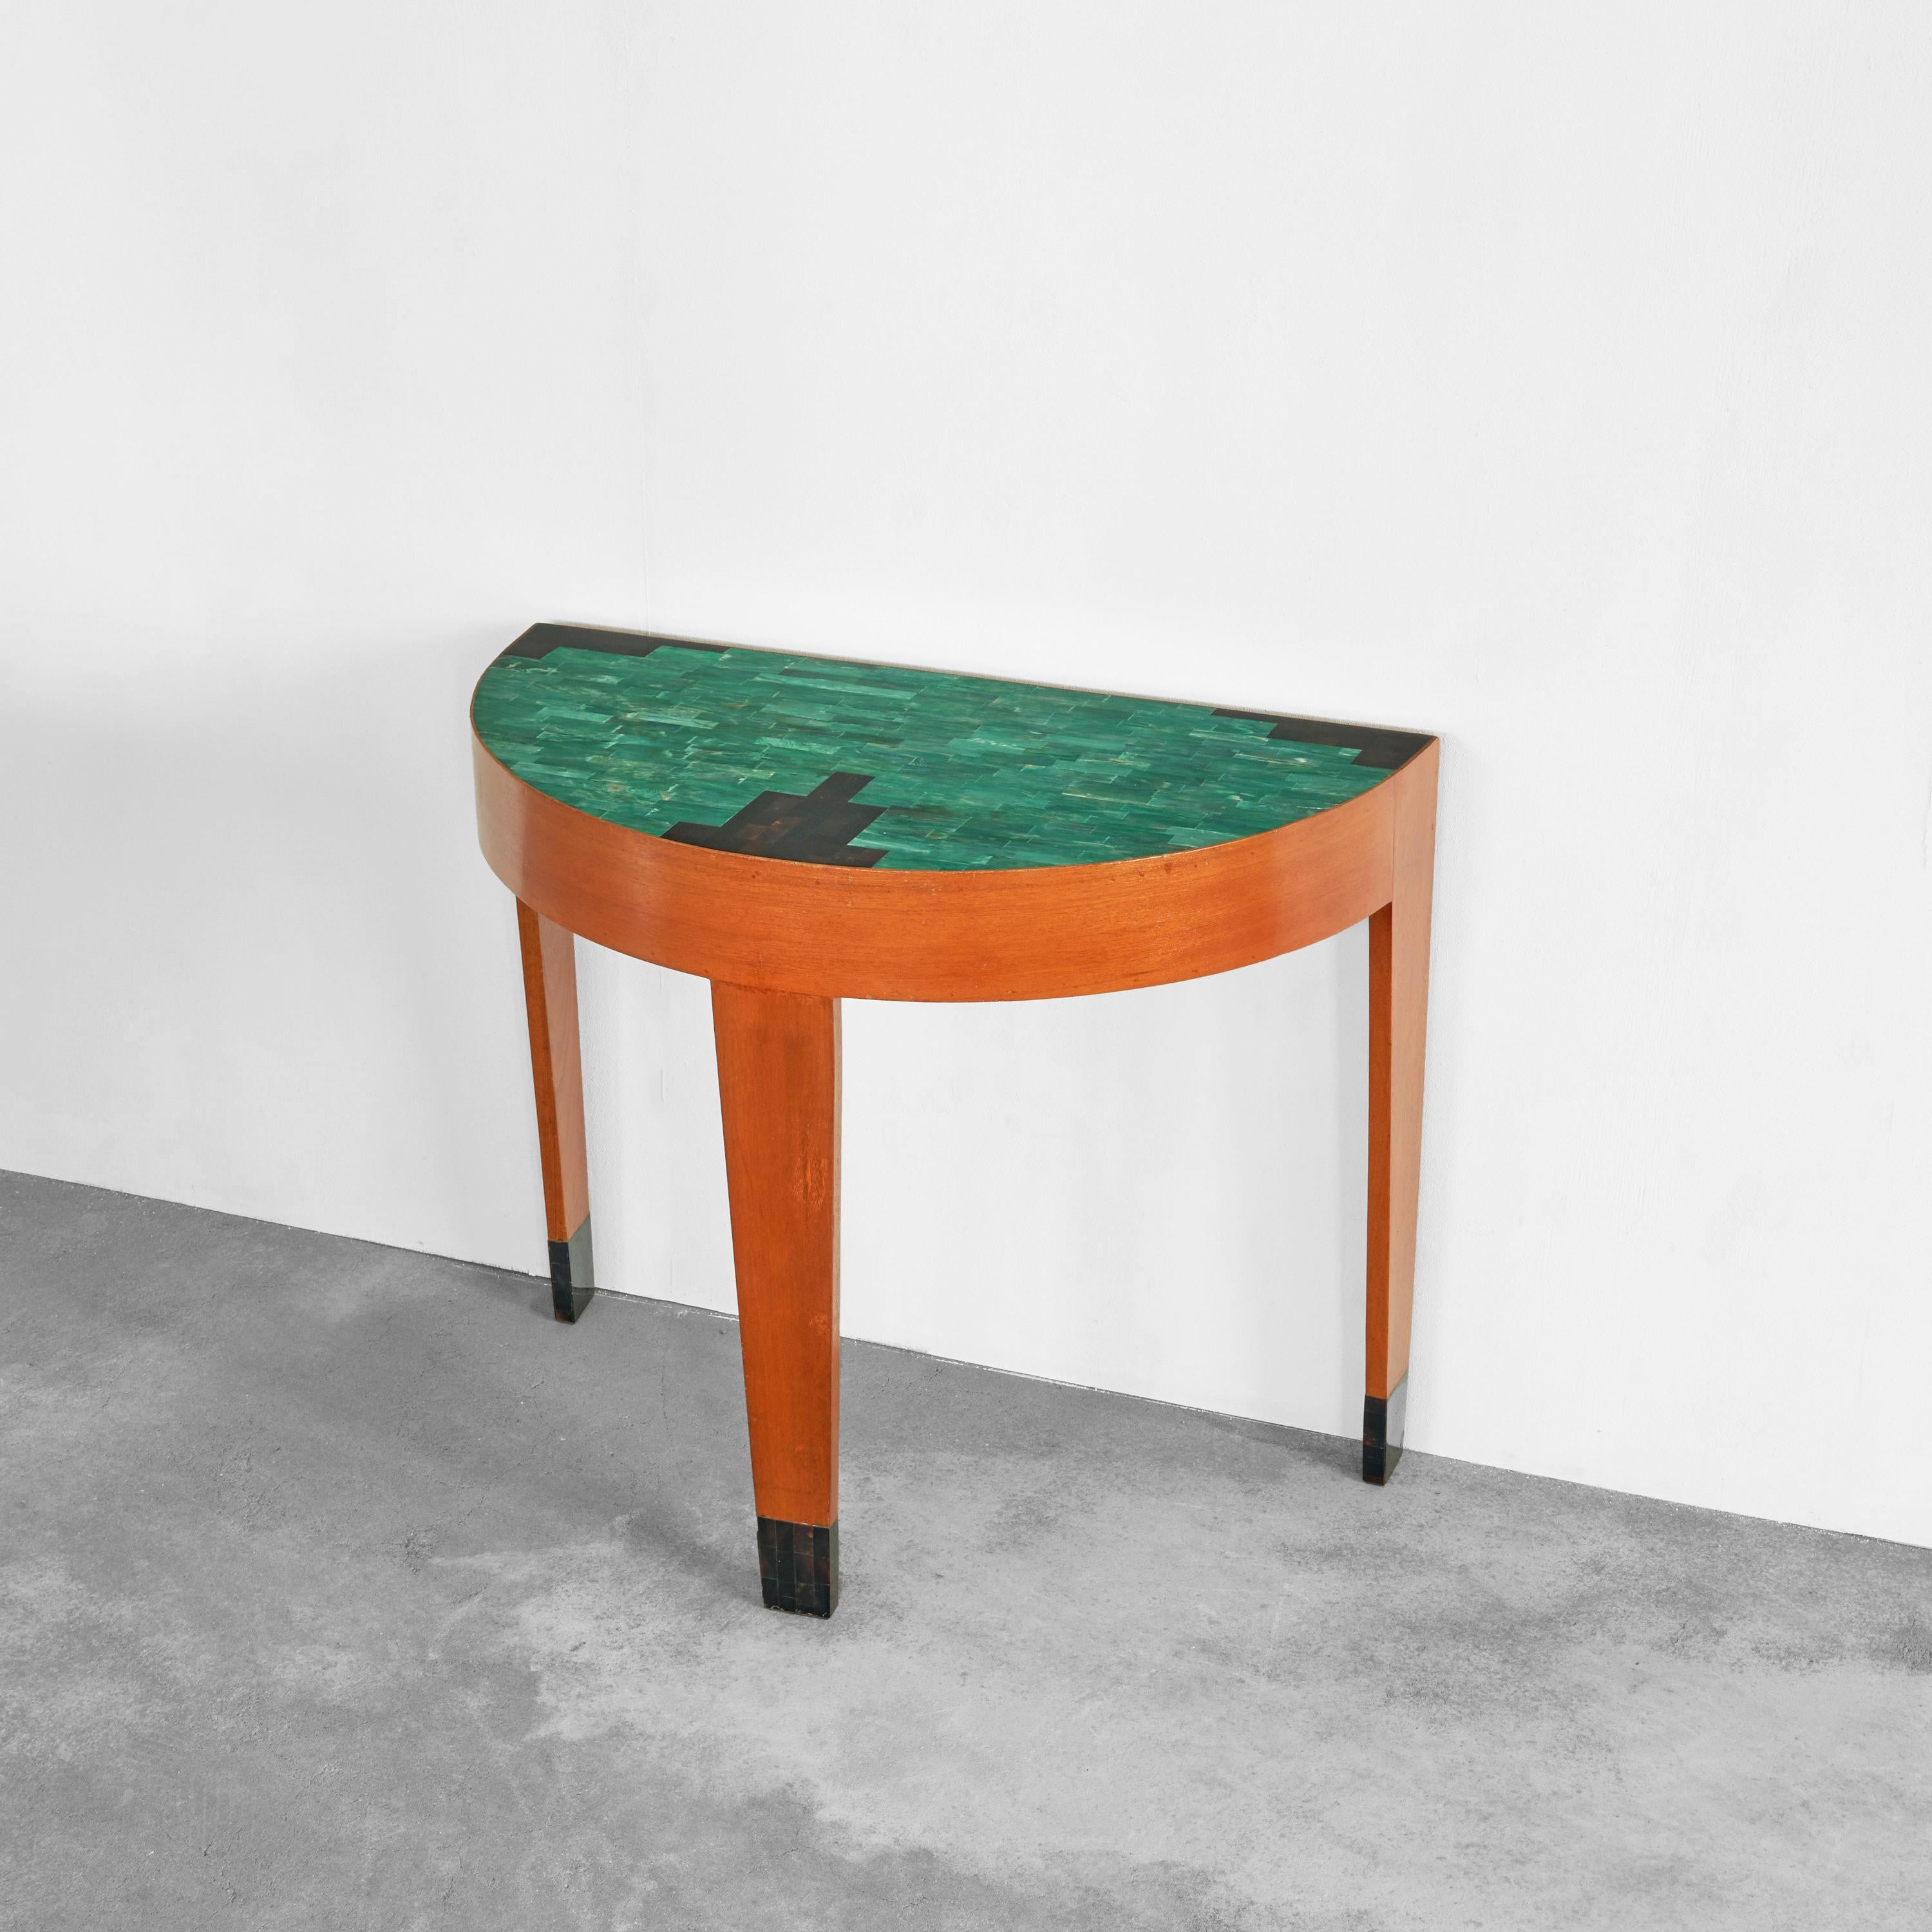 Art Deco Demi Lune Table in Malachite and Brown Shell Mosaic and Wood 1930s.

Exceptional demi lune console table, well crafted in teak with a top inlayed with green malachite and brown shell. This incredible piece shows a timeless design in the